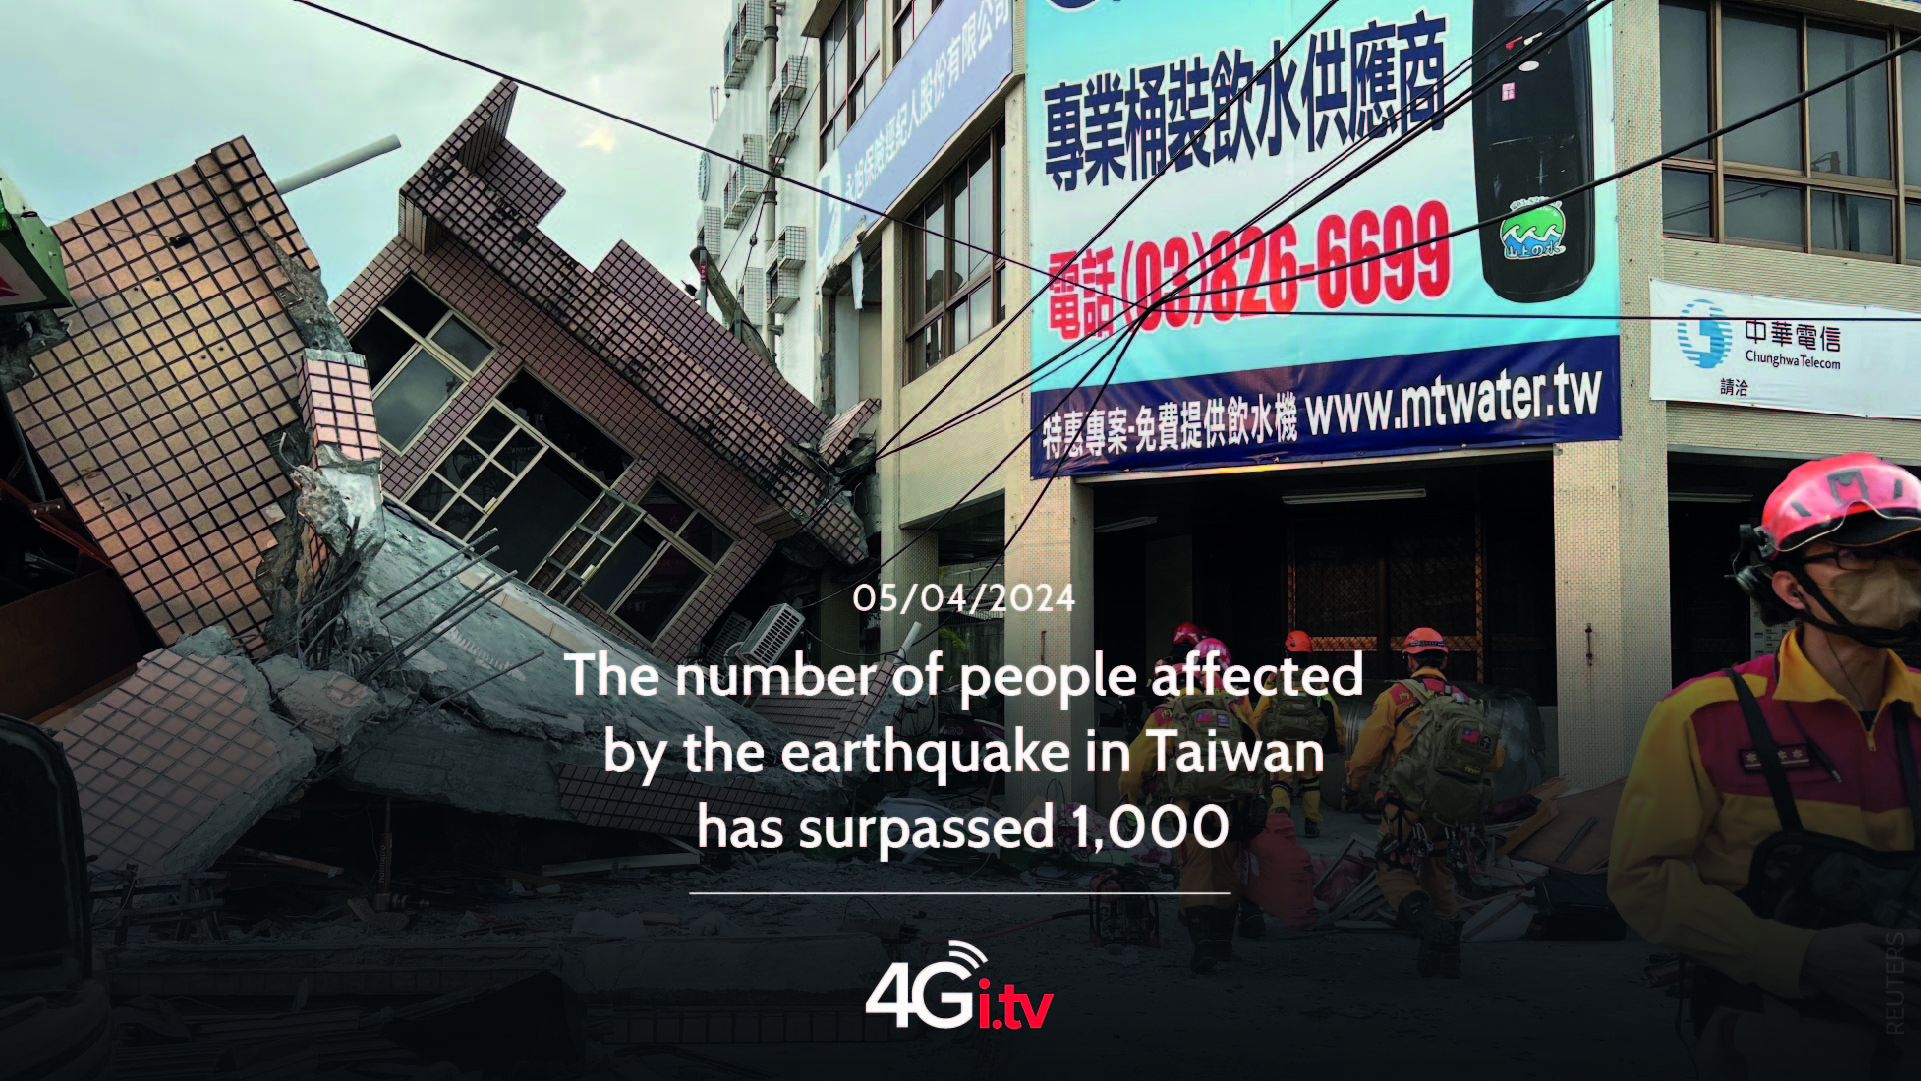 Lesen Sie mehr über den Artikel The number of people affected by the earthquake in Taiwan has surpassed 1,000